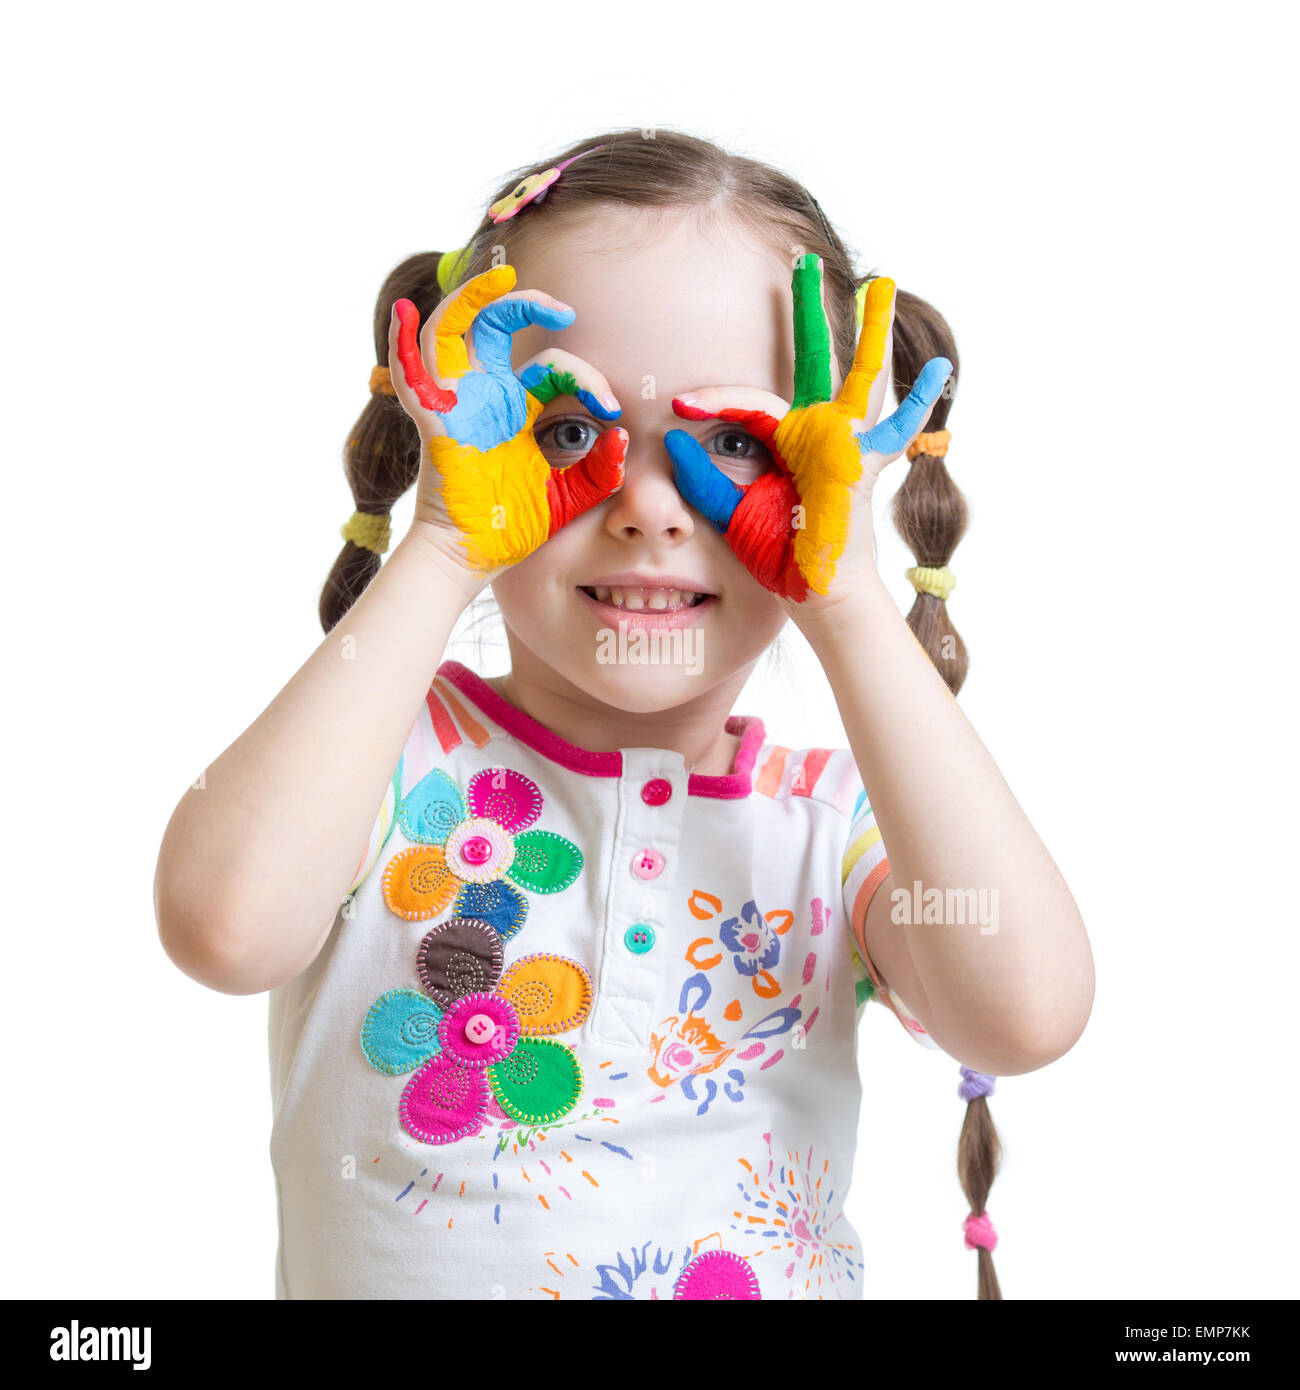 Four year old child girl with hands painted in color paints Stock Photo